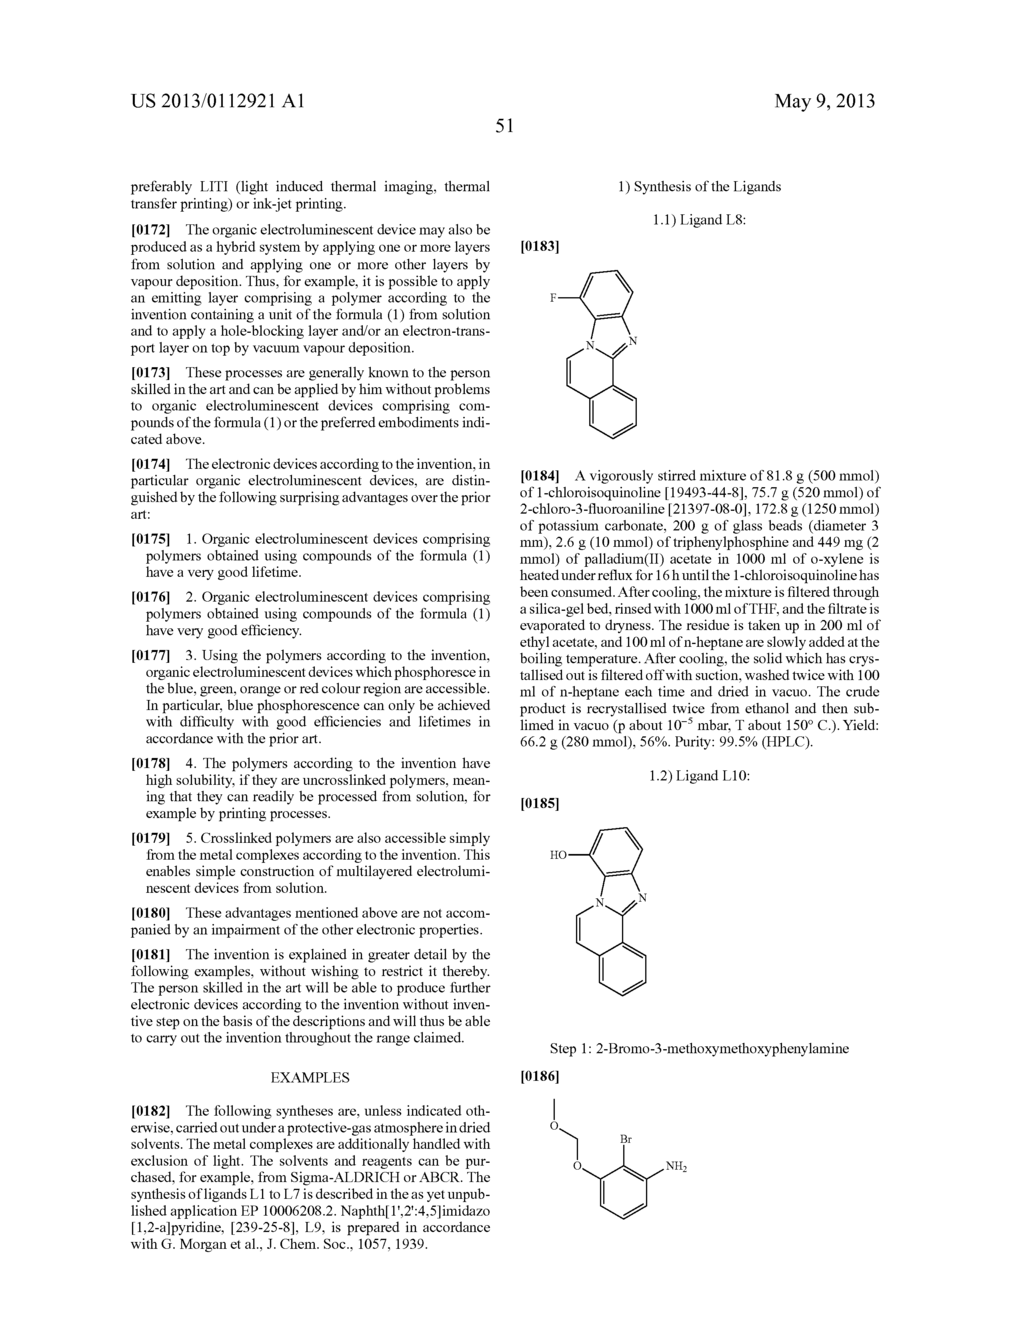 METAL COMPLEXES - diagram, schematic, and image 52